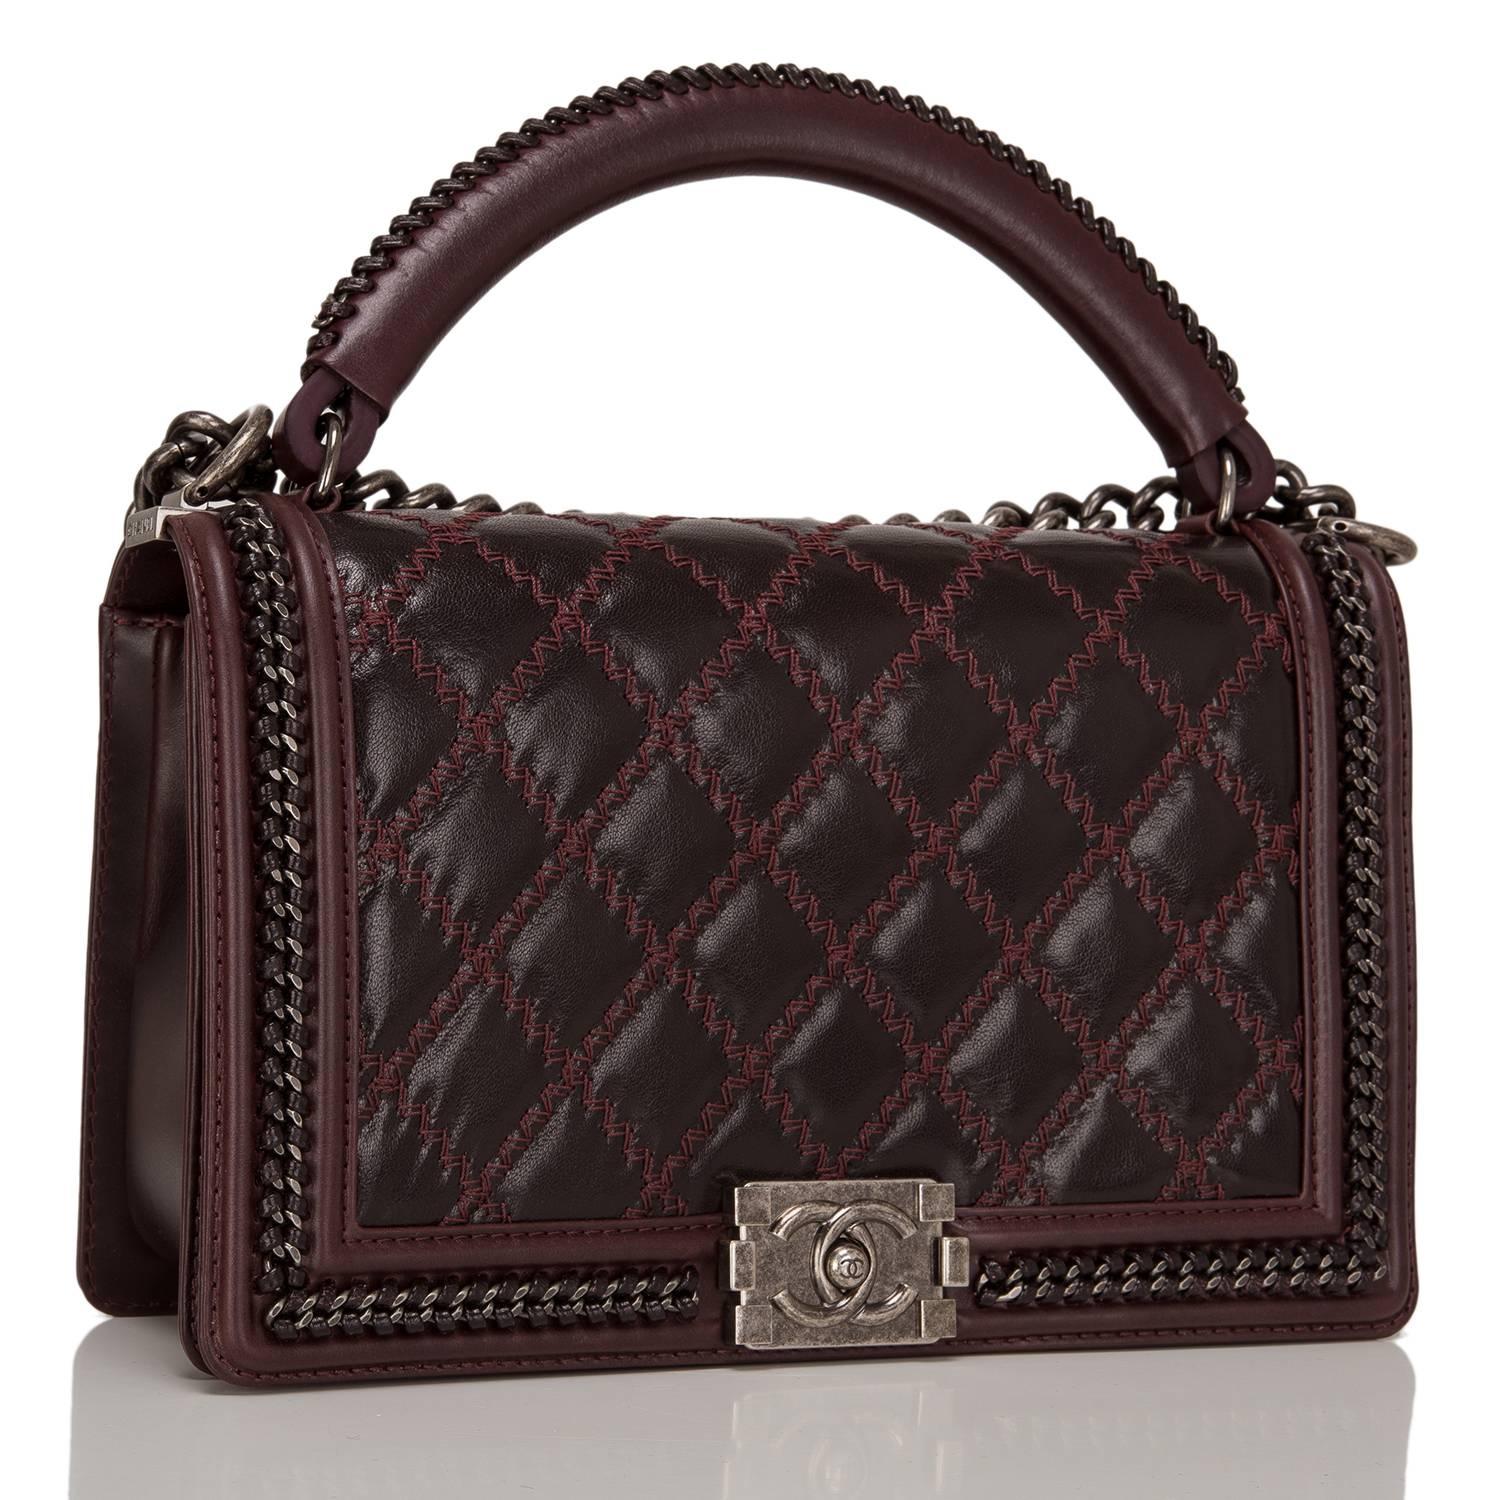  	
This Chanel limited edition New Medium Boy bag with a top handle is made of shiny goatskin leather and accented with aged ruthenium hardware.

The bag features a limited edition braided leather and chain top handle, a full front flap with the